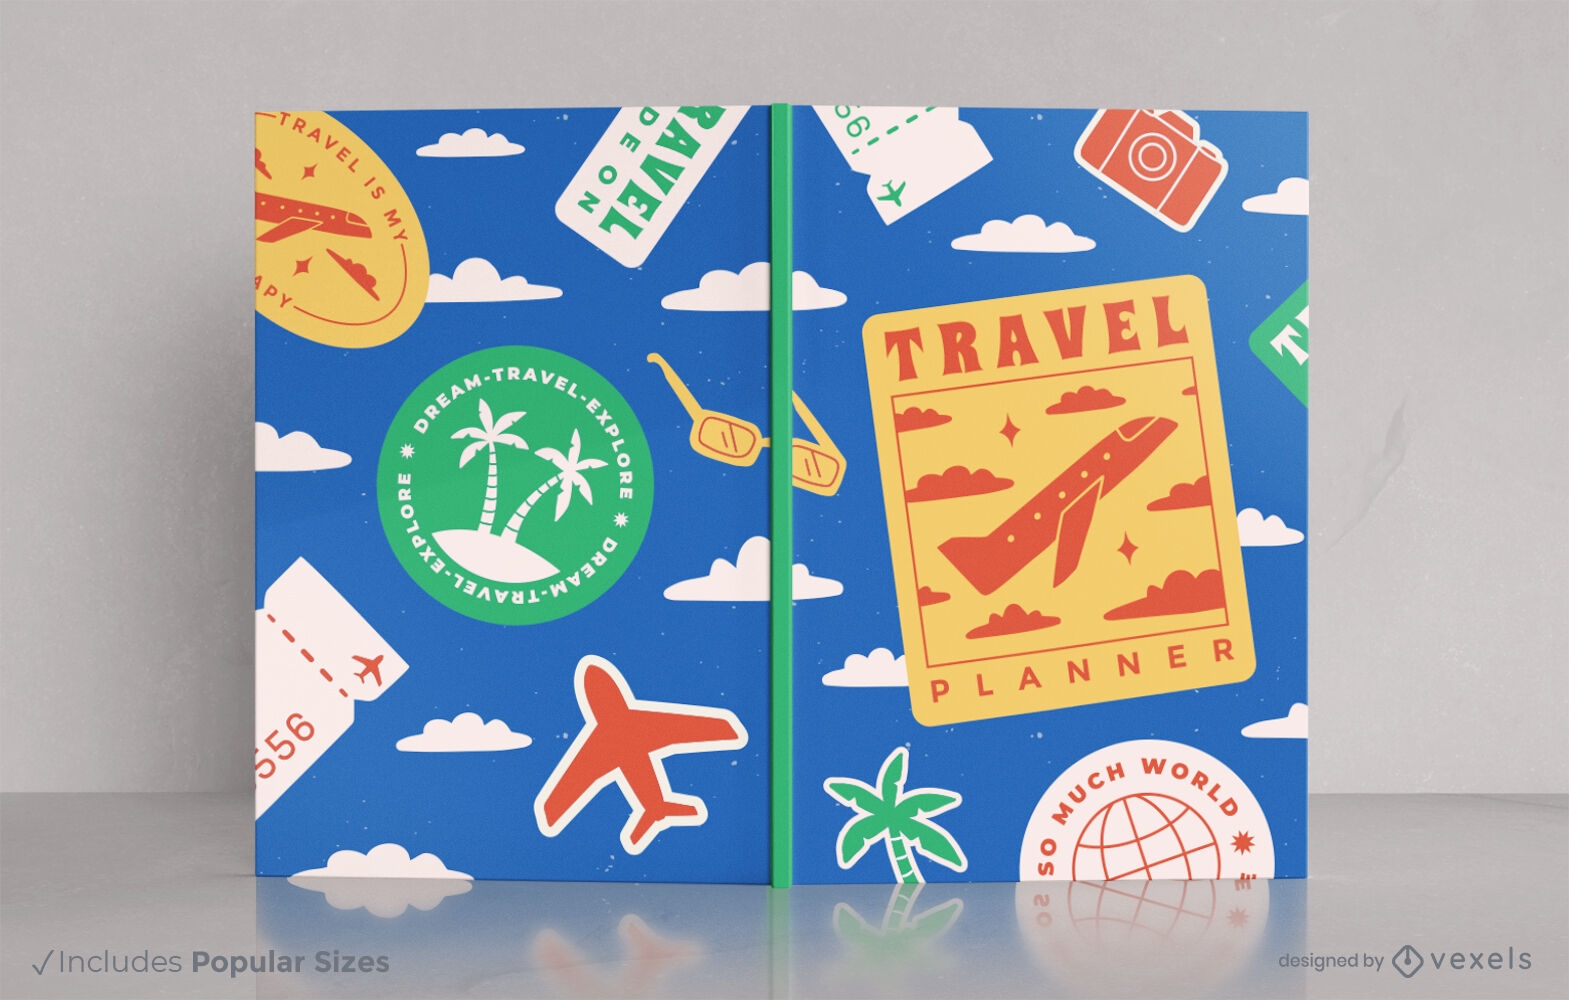 Traveling stickers book cover design